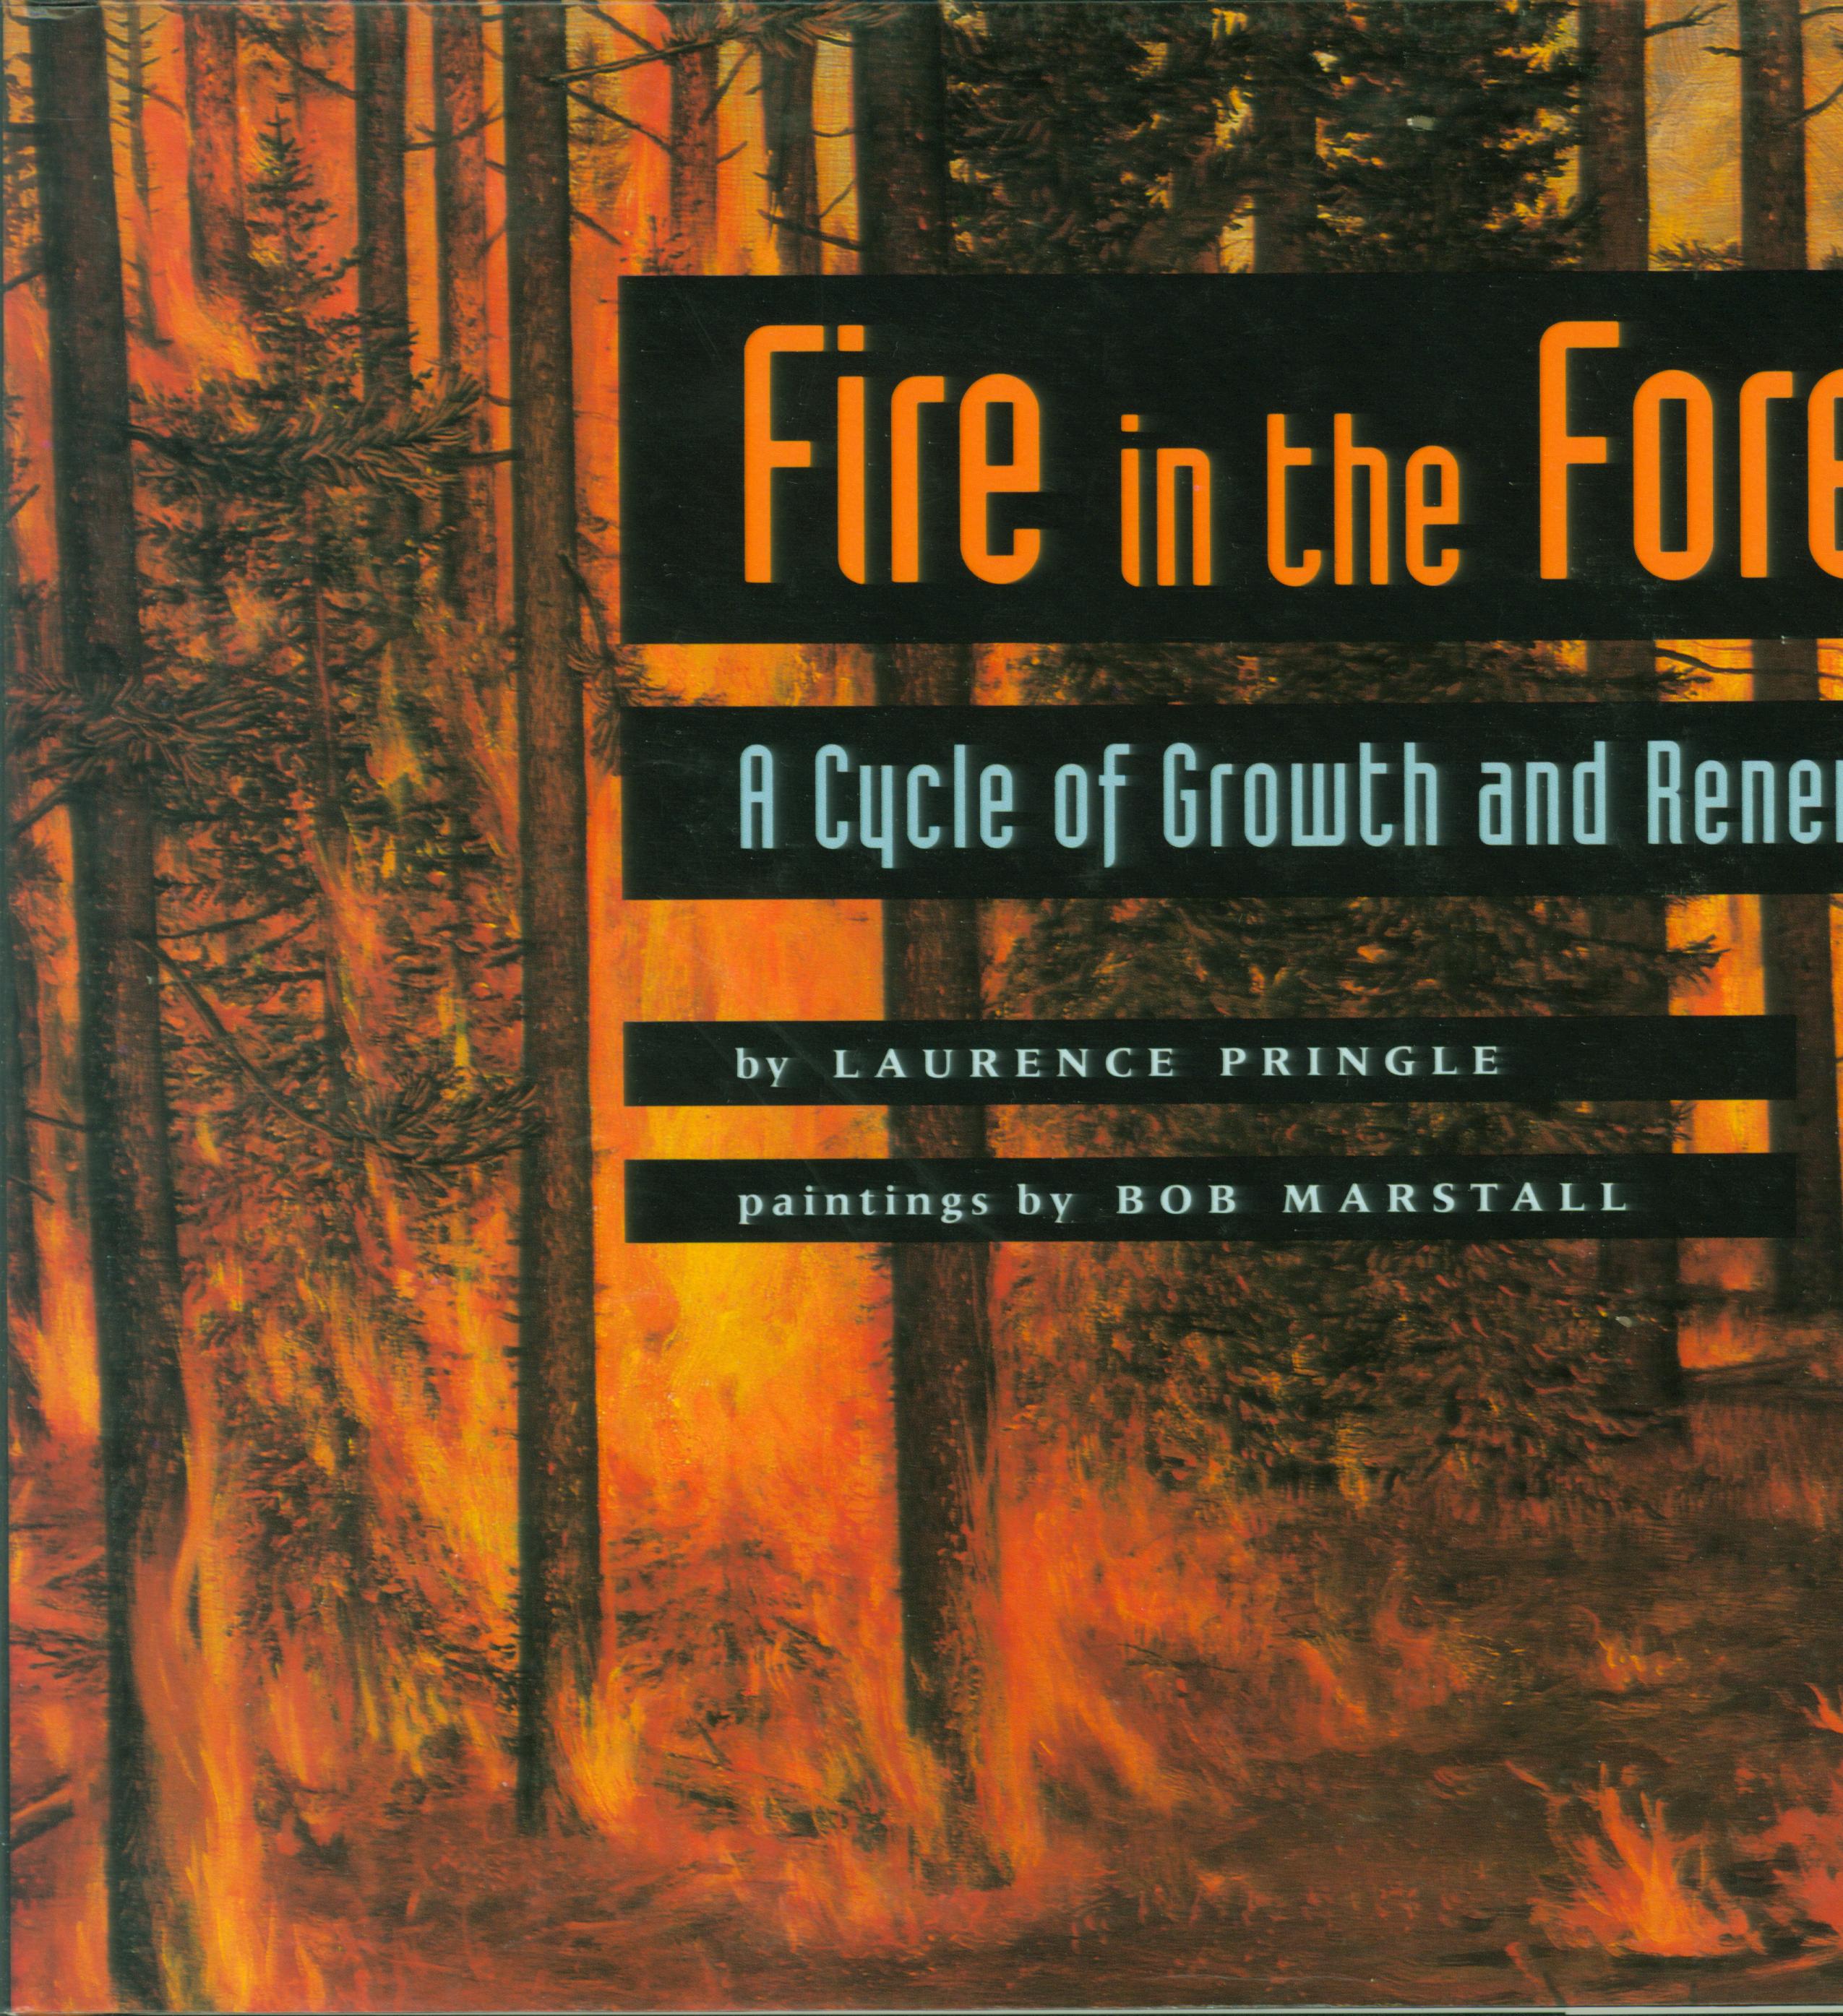 FIRE IN THE FOREST: a cycle of growth and renewal.